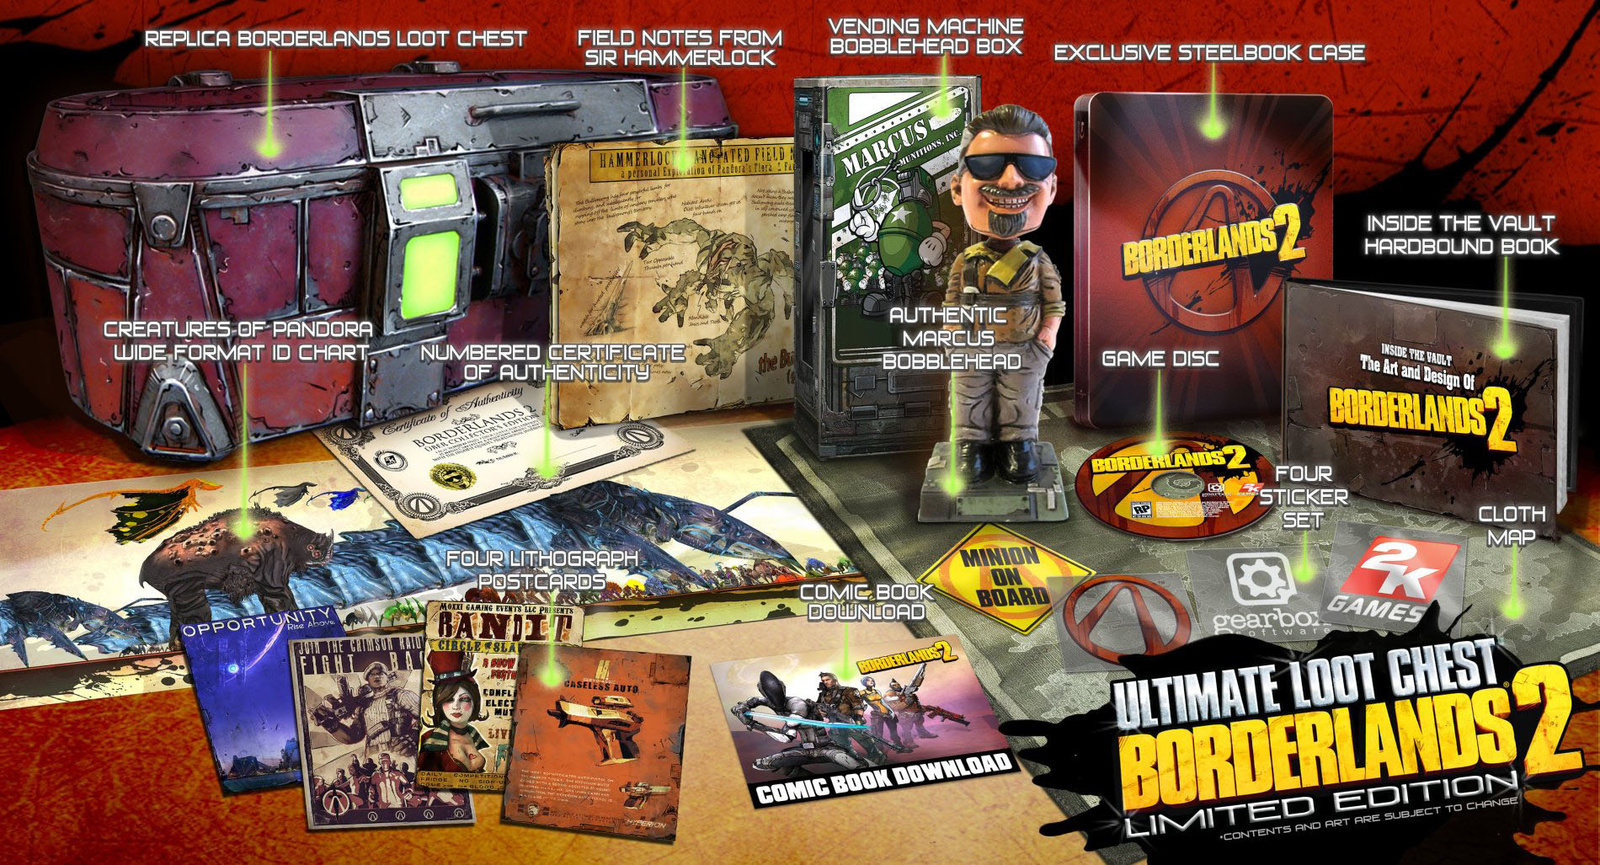 Borderlands 2 Ultimate Loot Chest